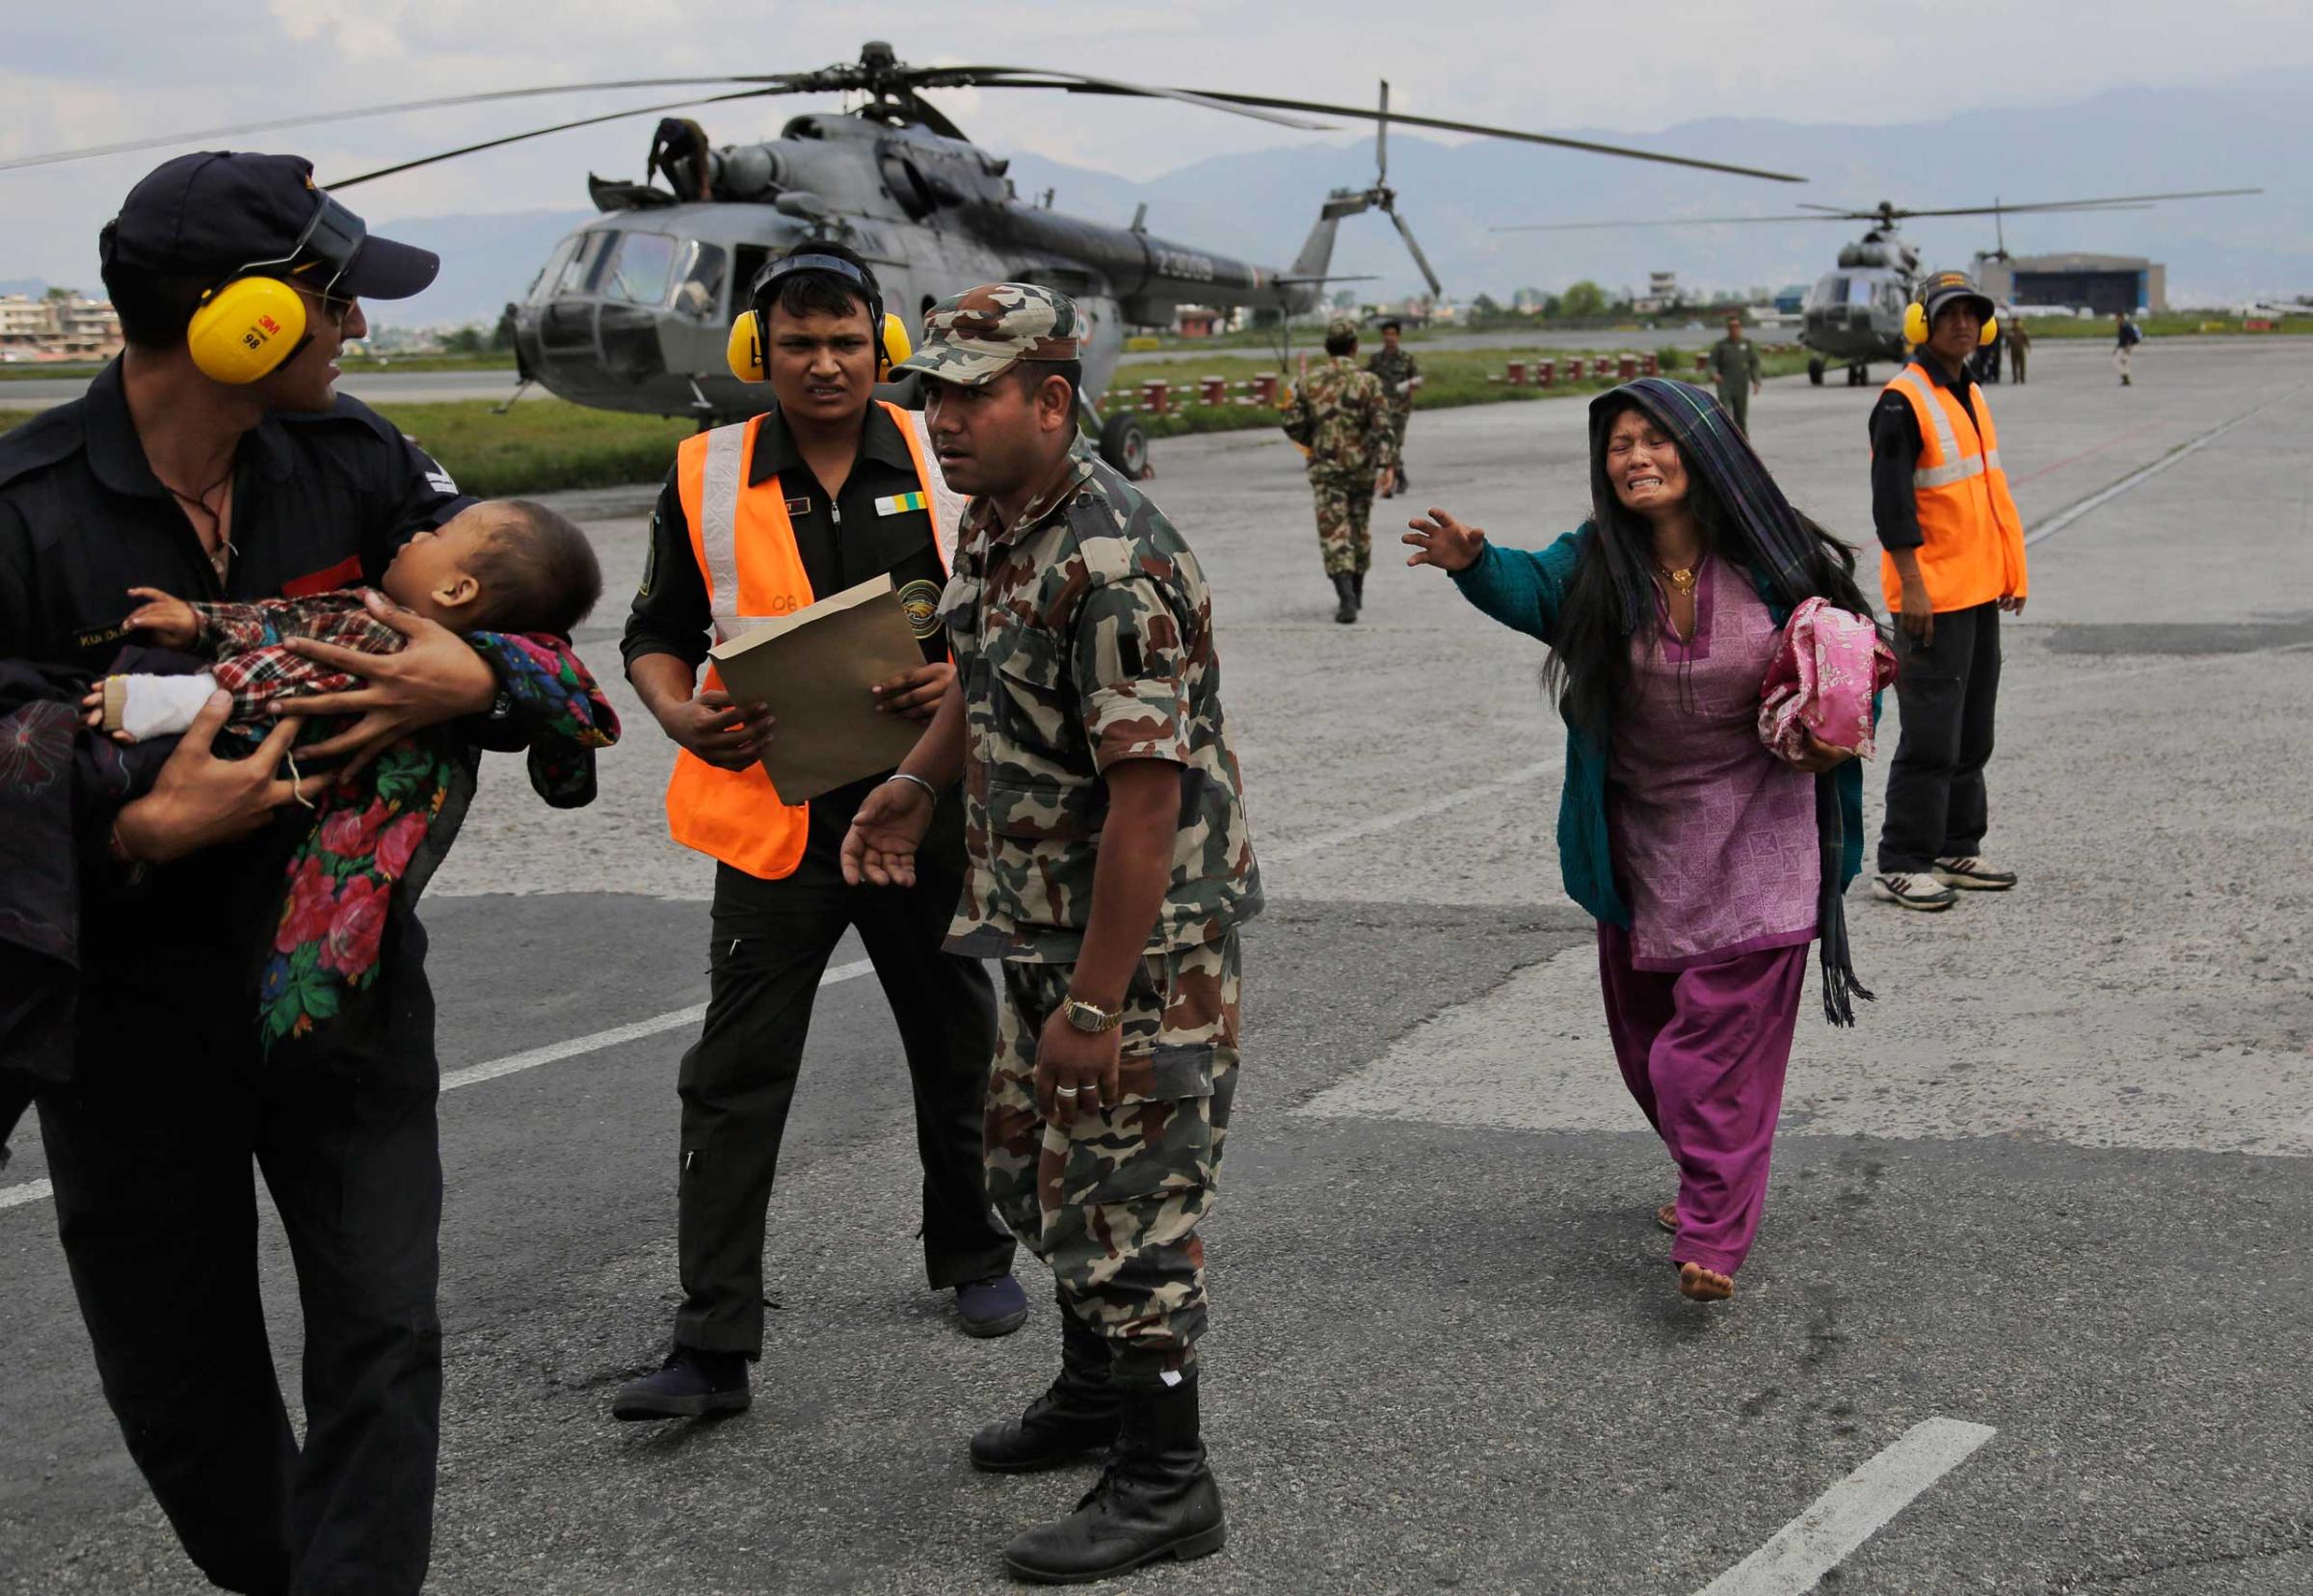 An Indian Air Force person walks carrying a Nepalese child, wounded in Saturday's earthquake, to a waiting ambulance as the mother rushes to join after they were evacuated from a remote area at the airport in Kathmandu on April 27, 2015.